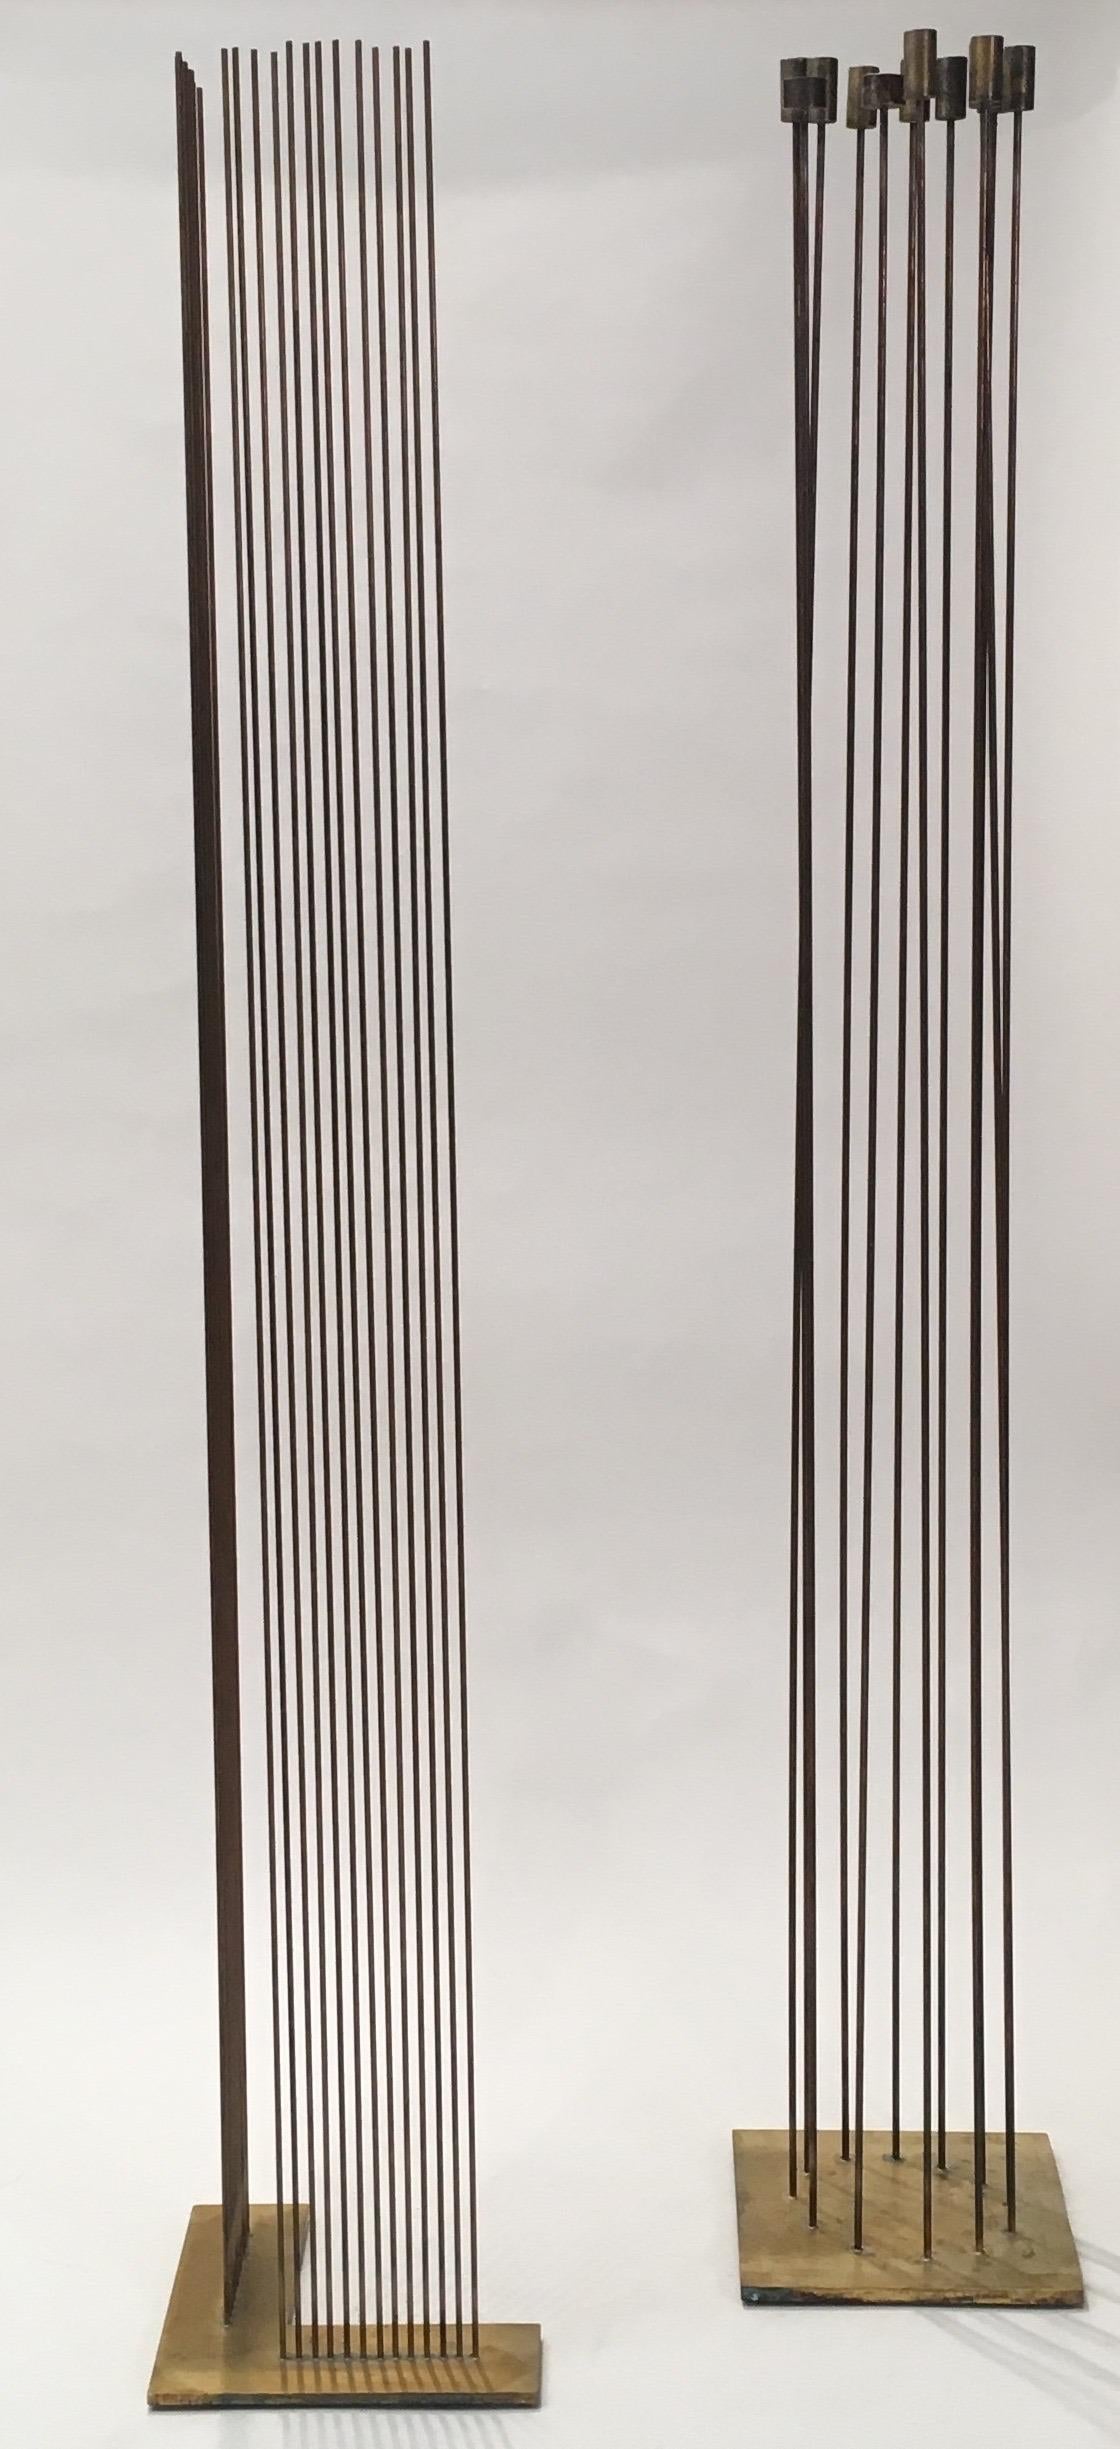 Contemporary artist Val Bertoia's pair of Sound Sculptures made in 2012 are part of the Bertoia Sonambient series. The full circle piece is made of 10 brass tops and 2 bronze tops silvered to beryllium-copper rods then silvered to a brass base.